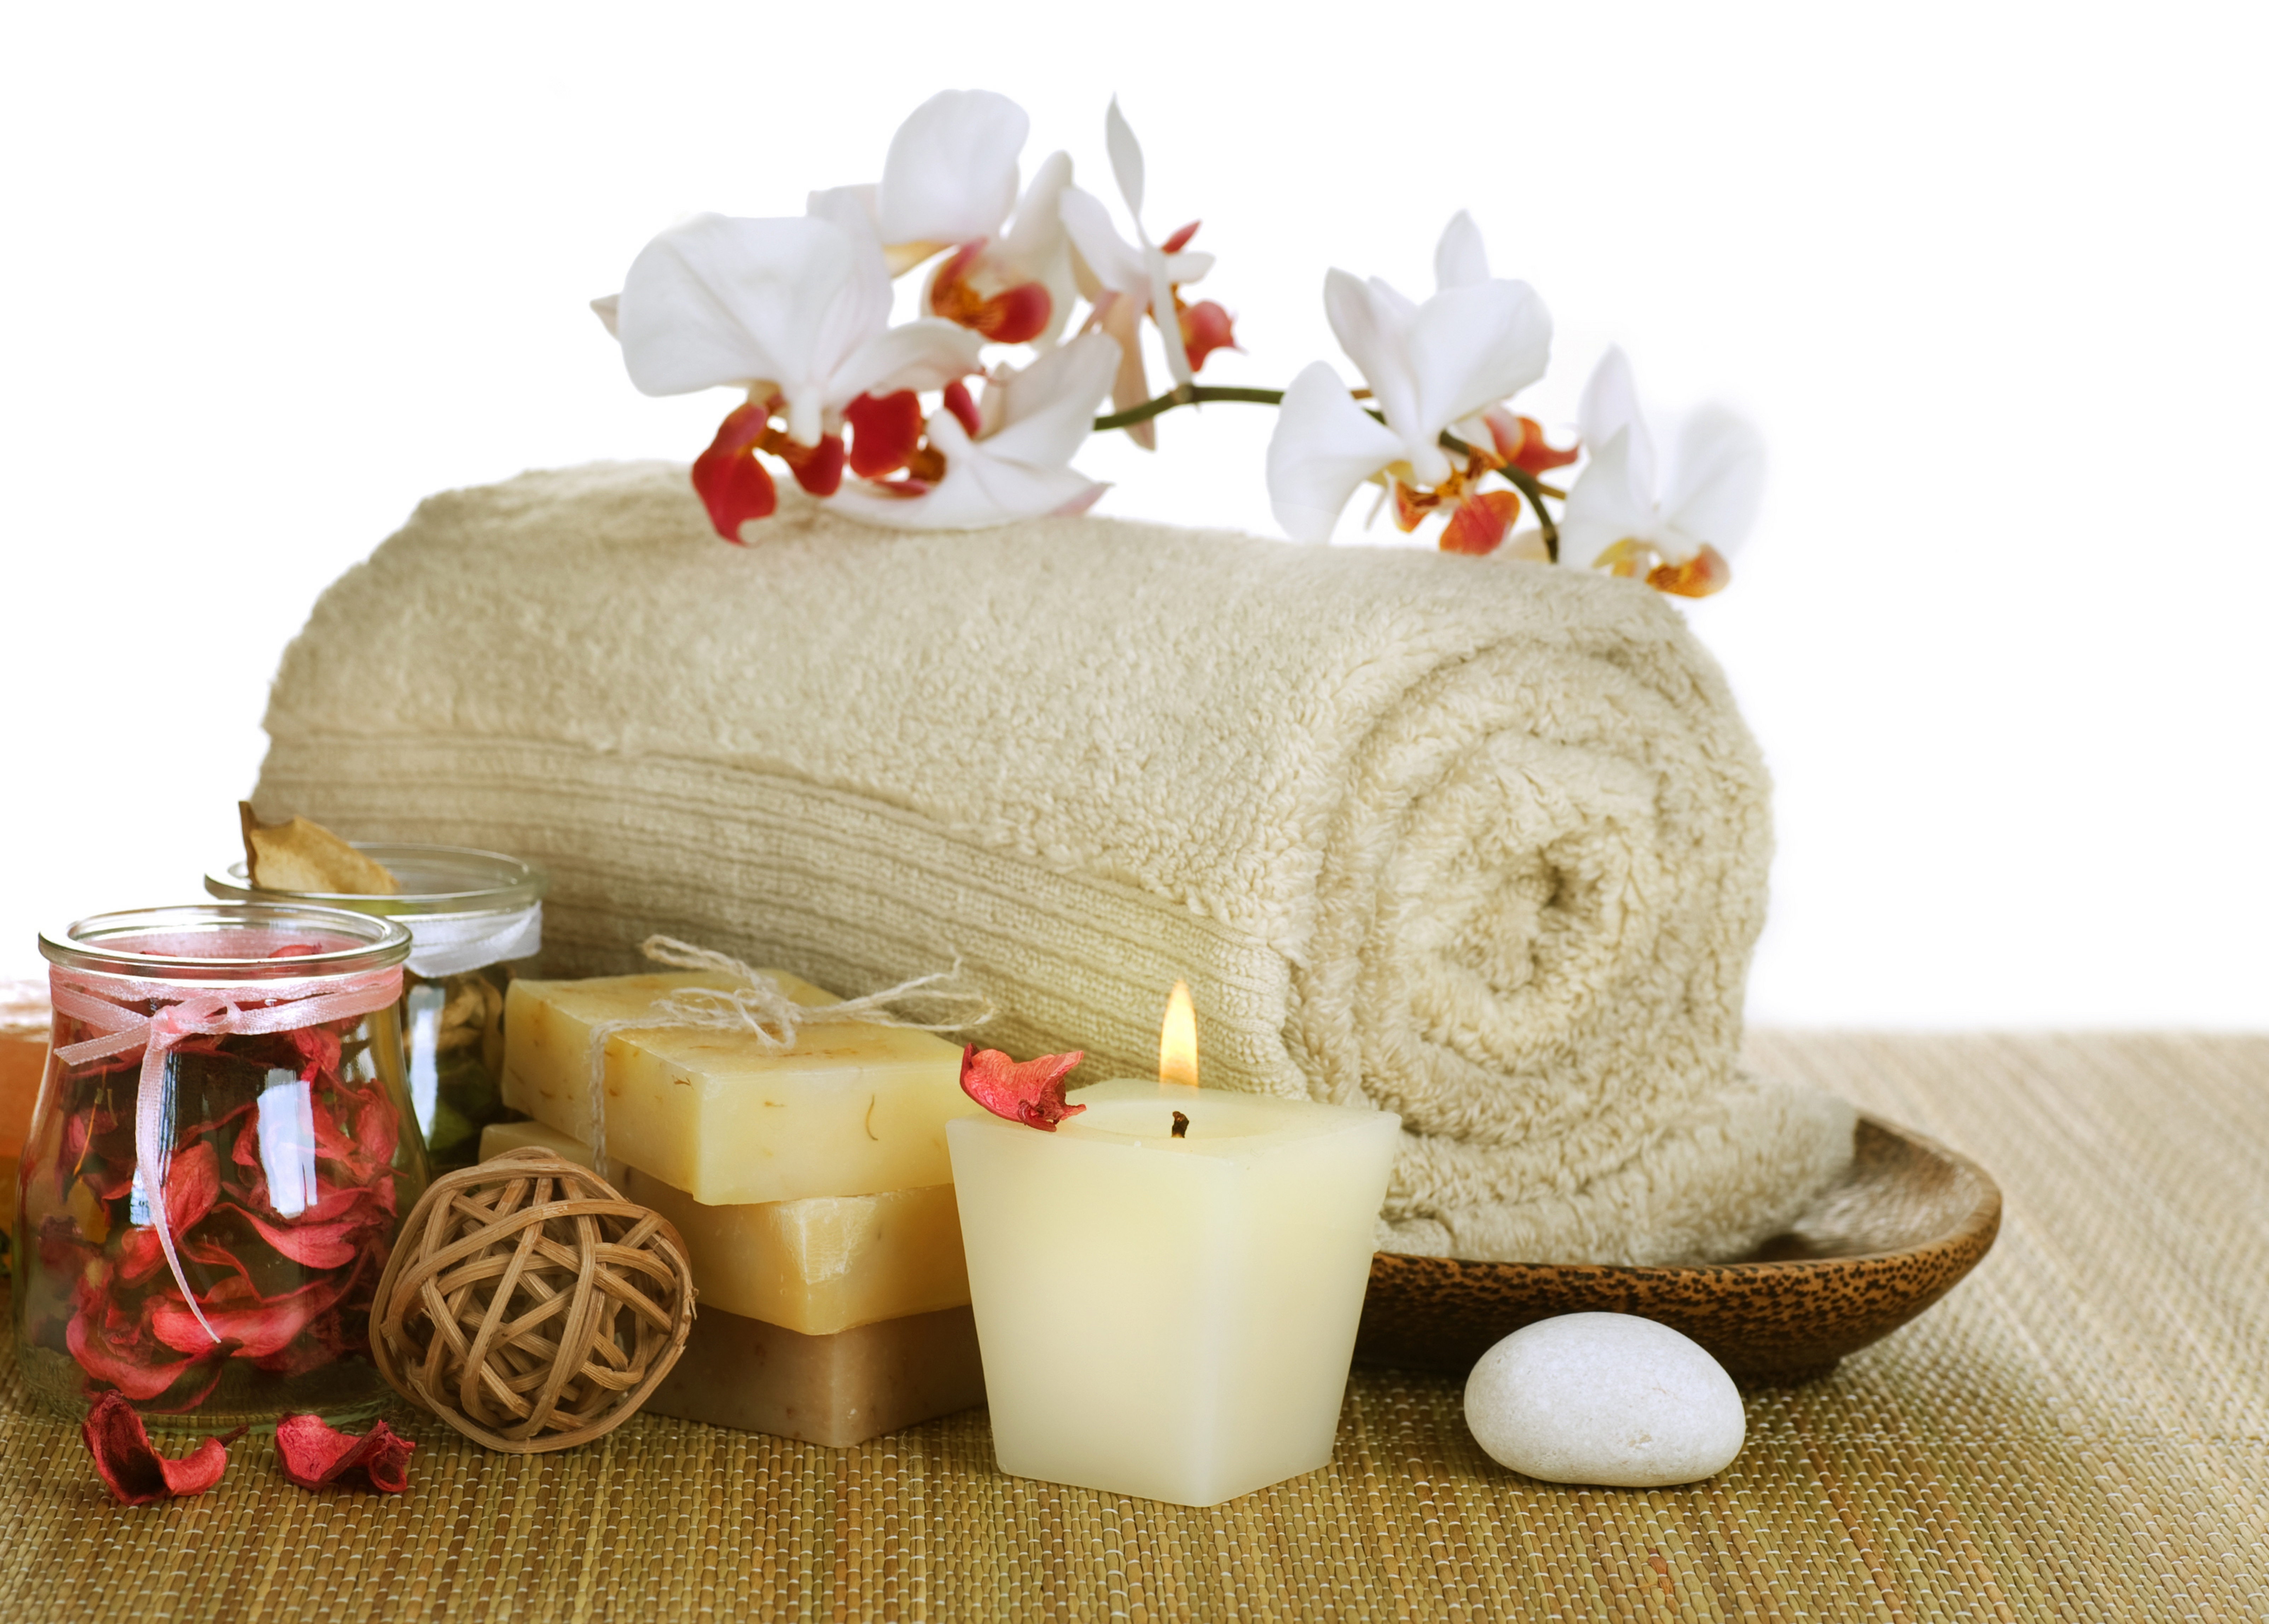 man made, spa, candle, orchid, petal, soap, towel